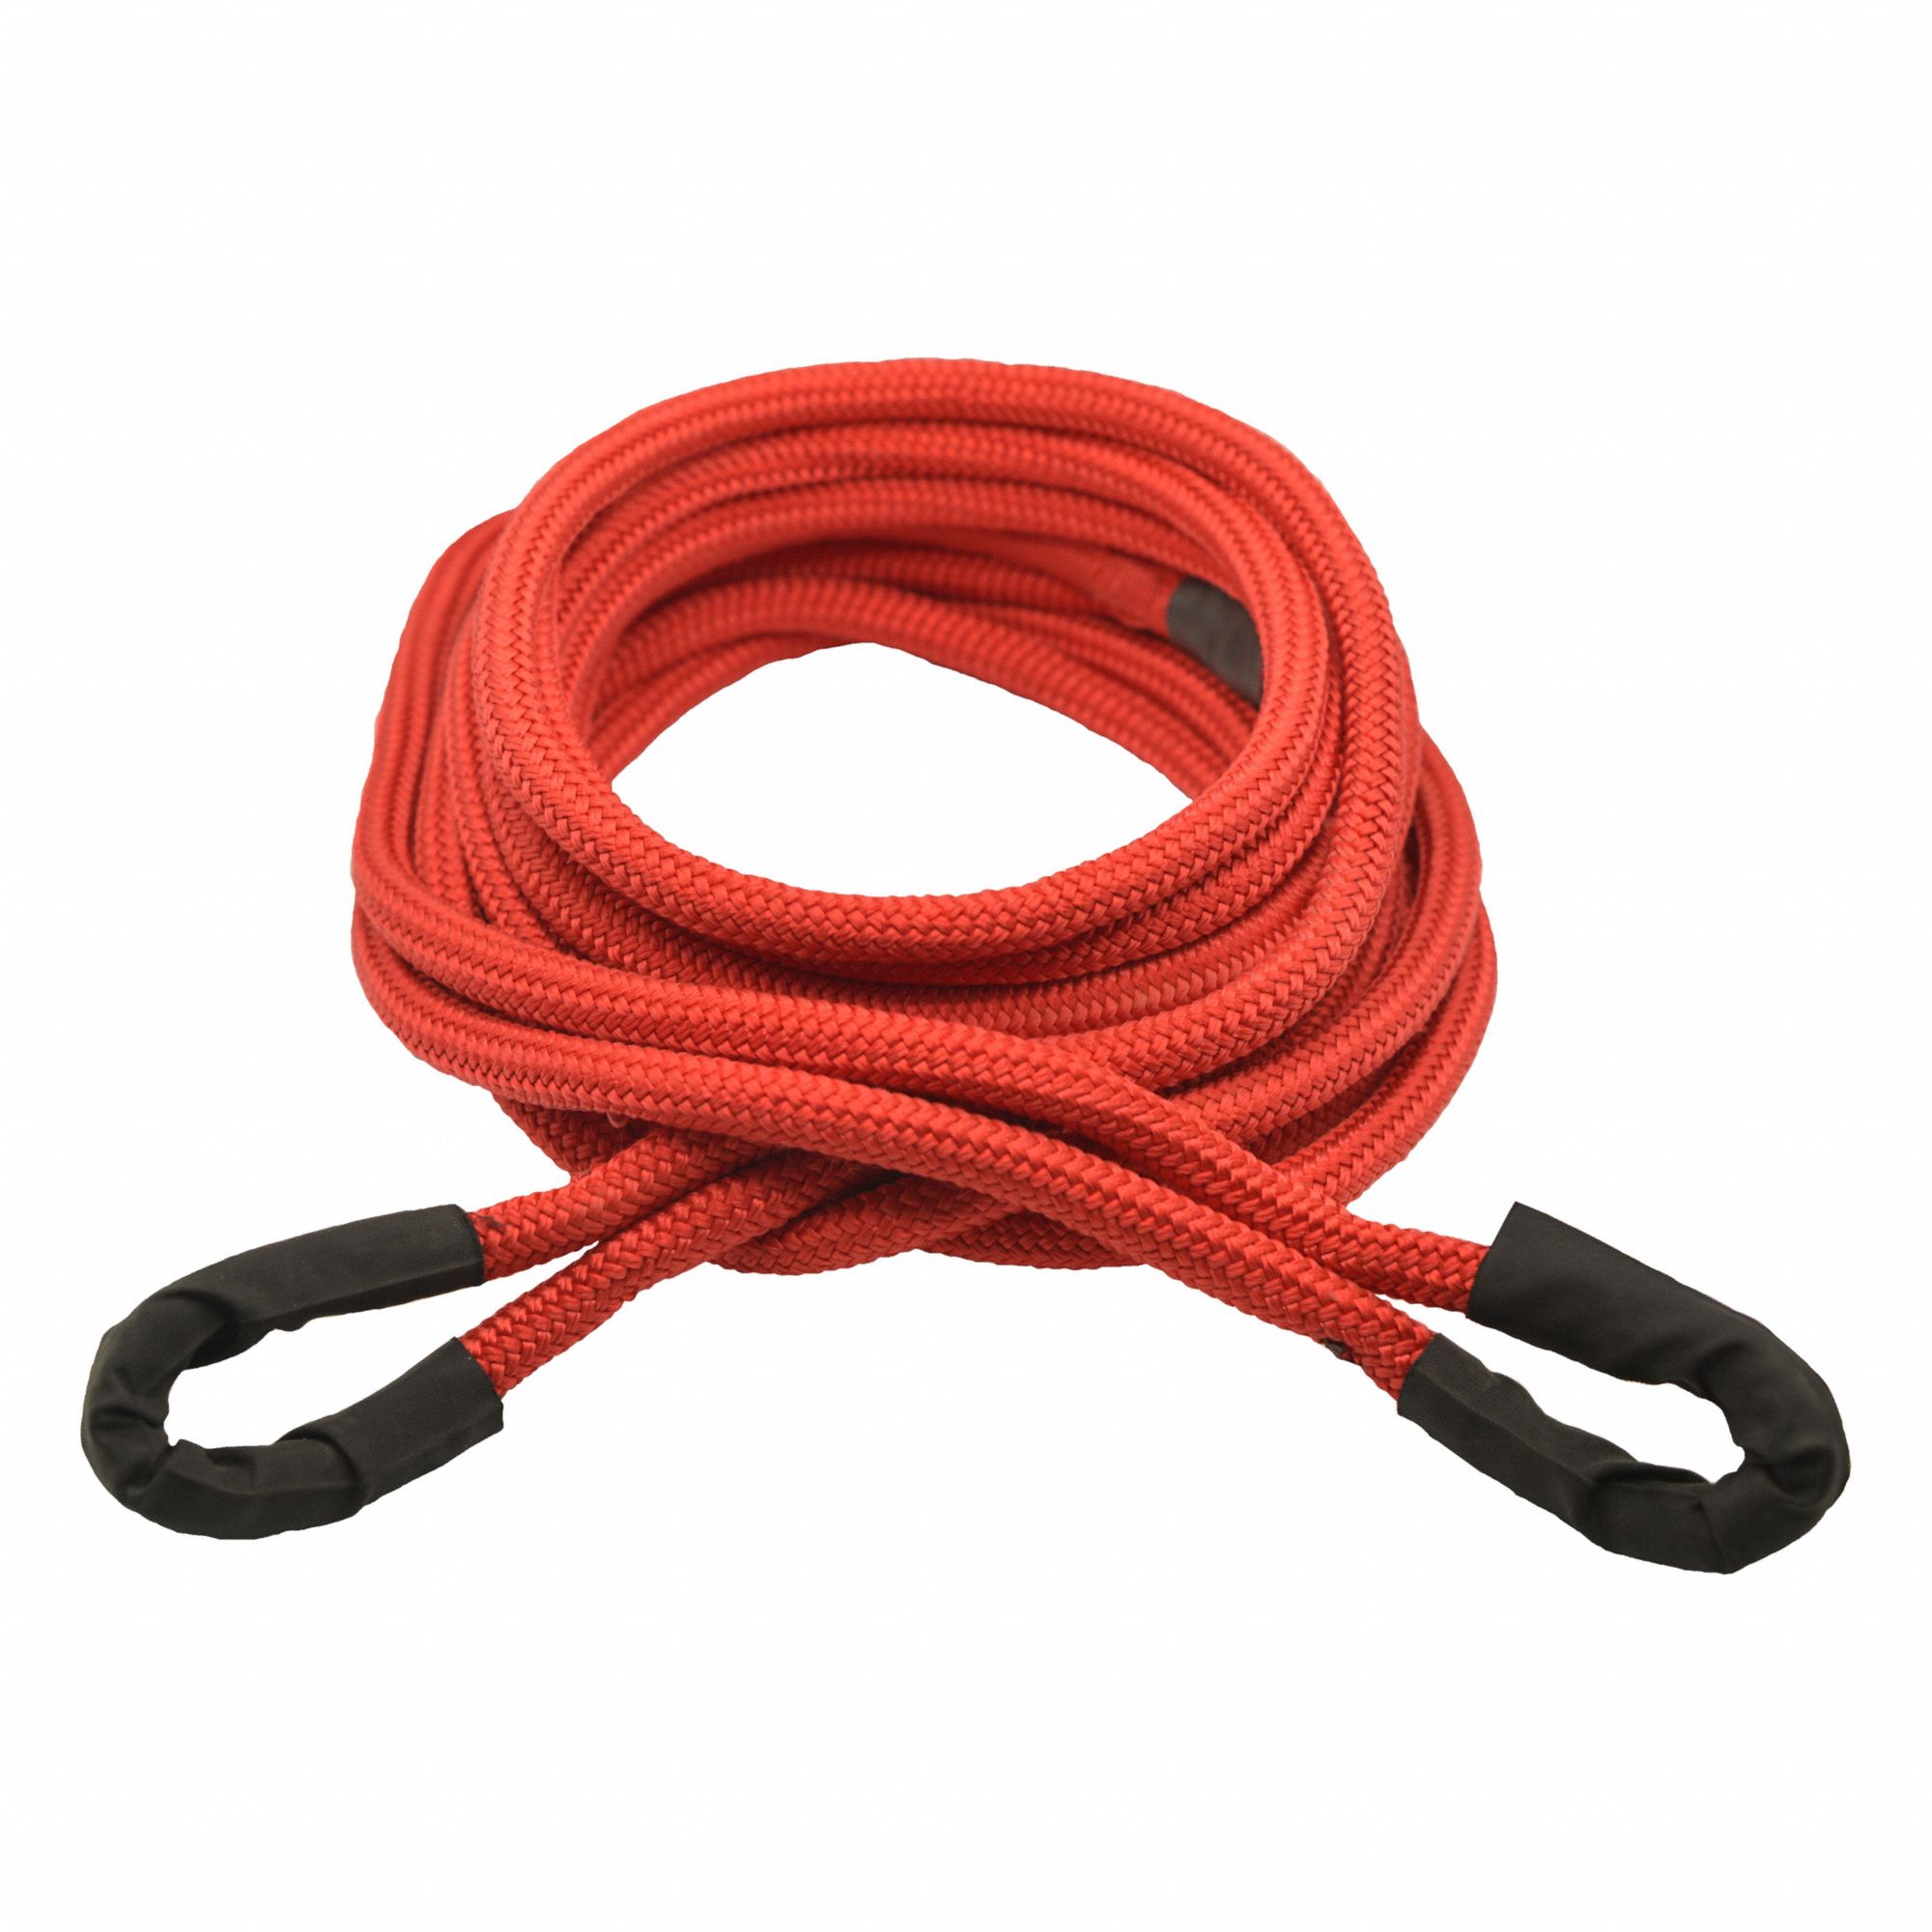 Recovery Rope: 20 ft Lg, 5/8 in Dia, Nylon, Loop, Nylon, Red, Includes Storage Bag